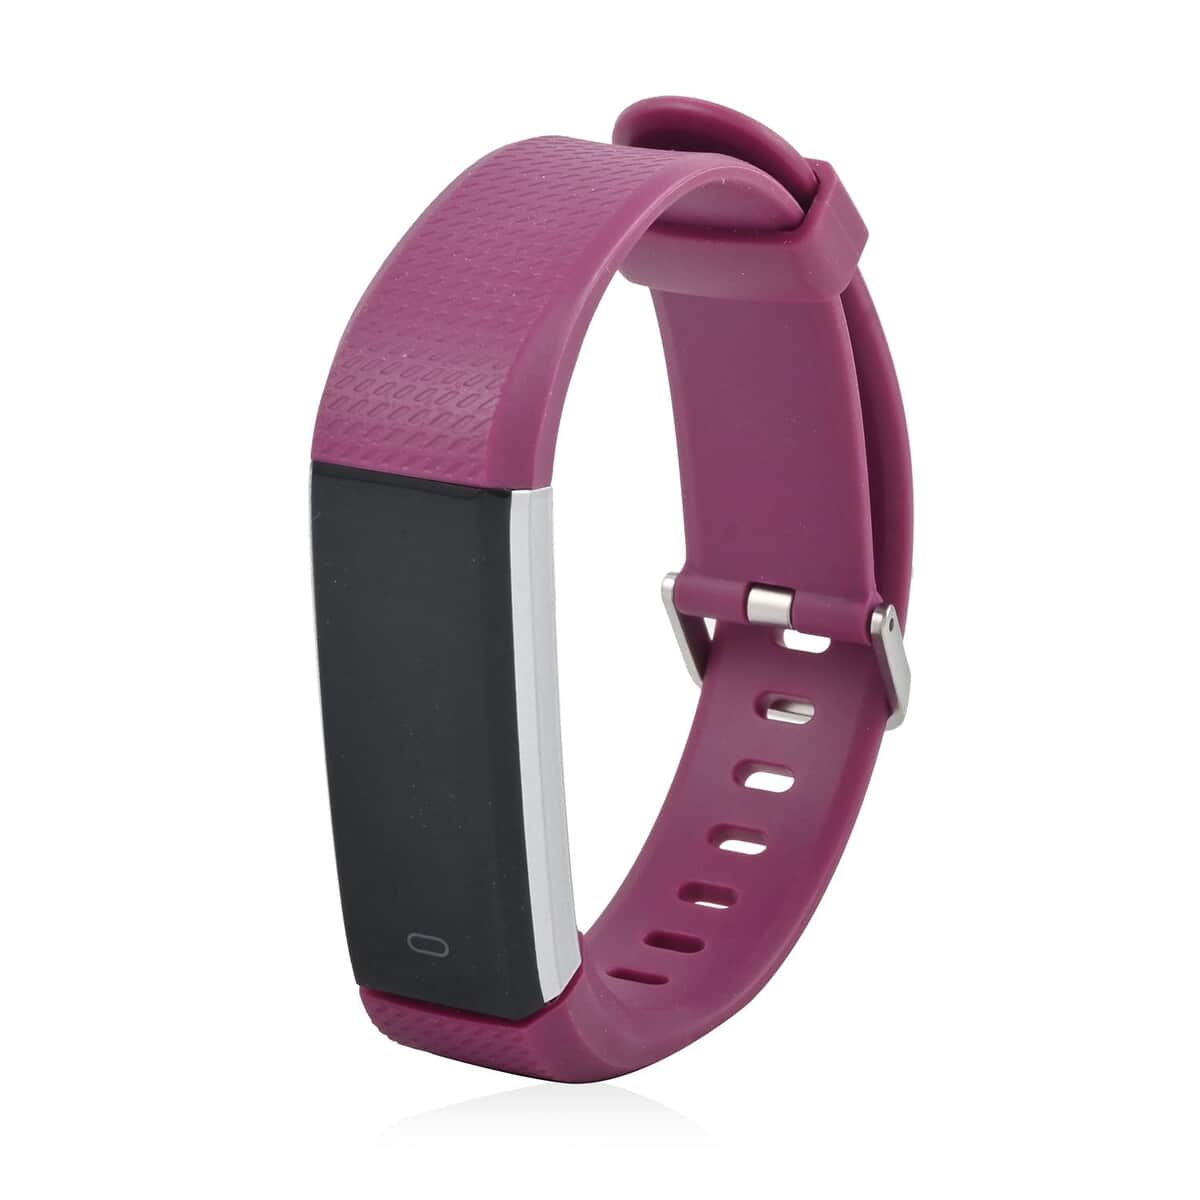 Letscom ID115UHR Fitness Tracker includes Pedometer and Sleep Monitoring Smart Watch with Purple Strap (1 inch screen, 5.5-9 inches) image number 2